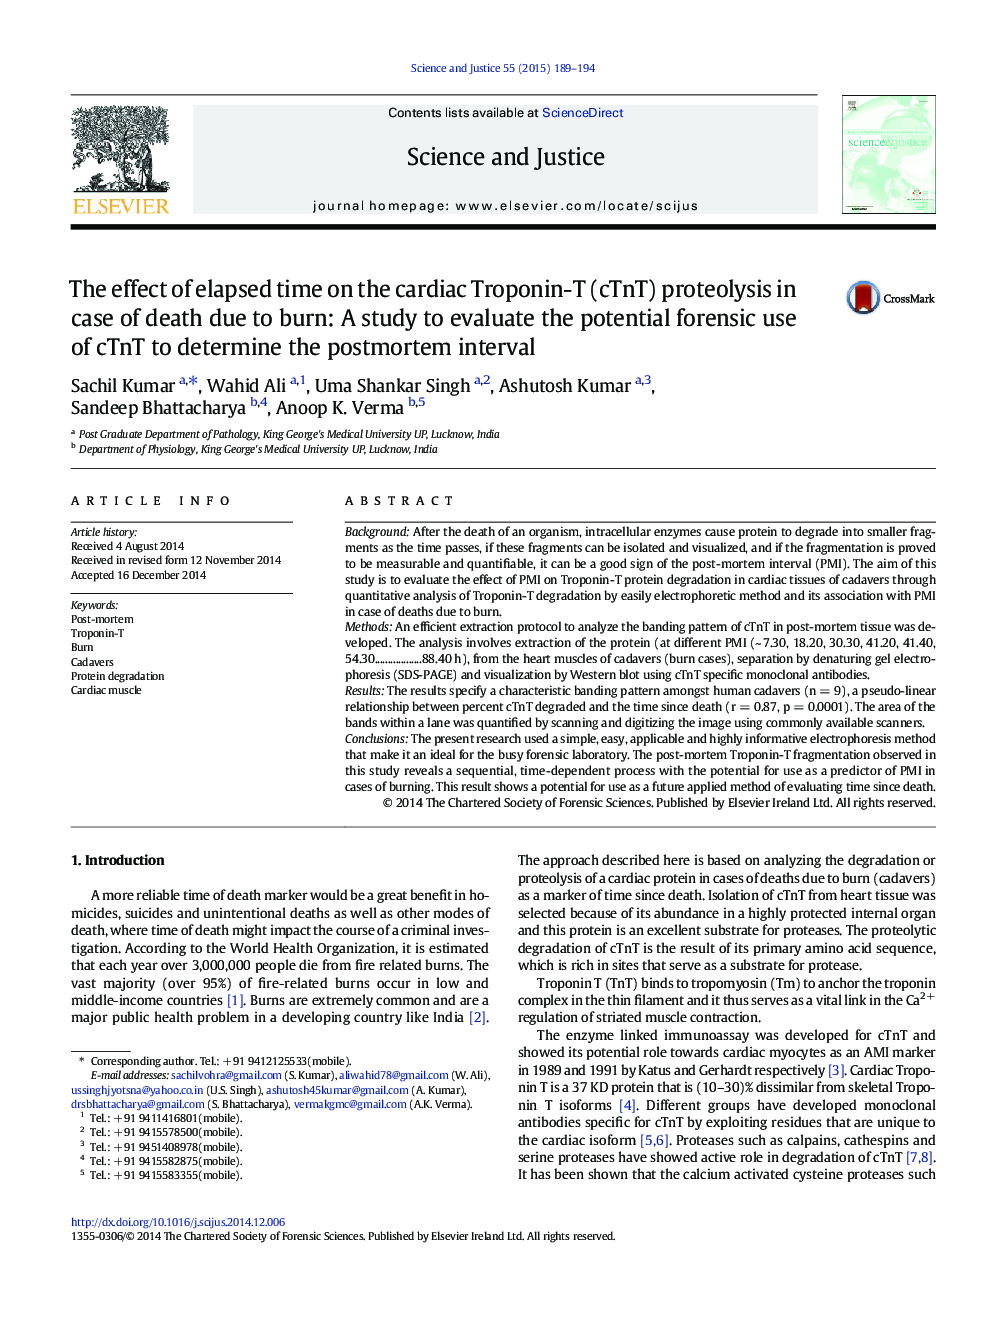 The effect of elapsed time on the cardiac Troponin-T (cTnT) proteolysis in case of death due to burn: A study to evaluate the potential forensic use of cTnT to determine the postmortem interval